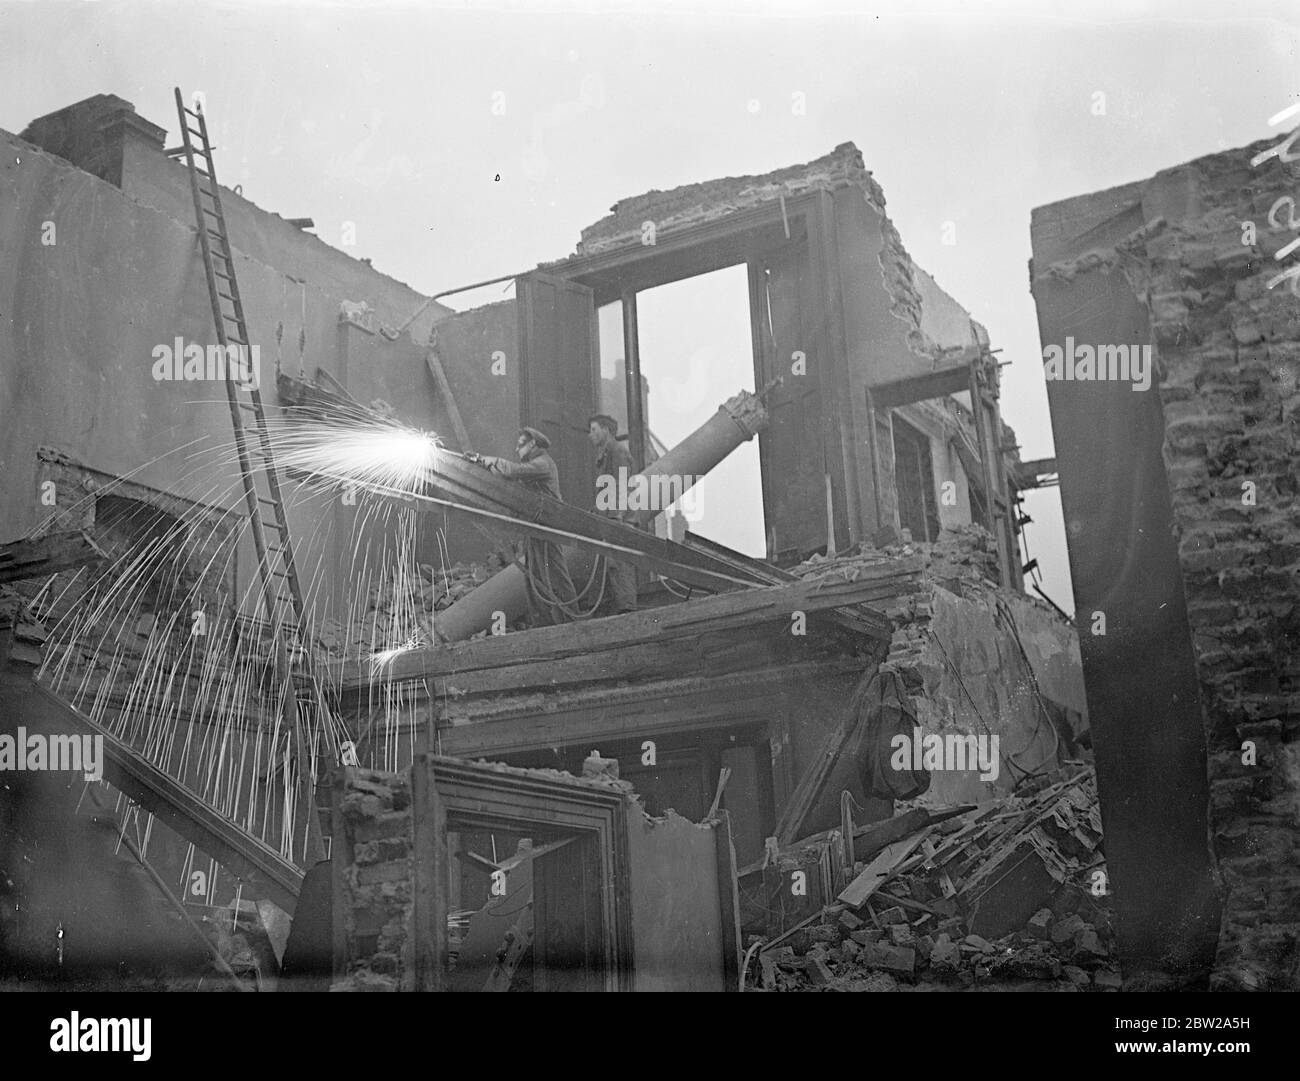 Where 'stars' of the national theatre will 'Scintiliate'. Workmen with an Oxy acetylene torch sends up a row of molten metal as he cuts away girders during the demolition of buildings to make way for the new National Theatre on a site situated near the Victoria and Albert Museum, Kensington, London. 2 December 1937 Stock Photo